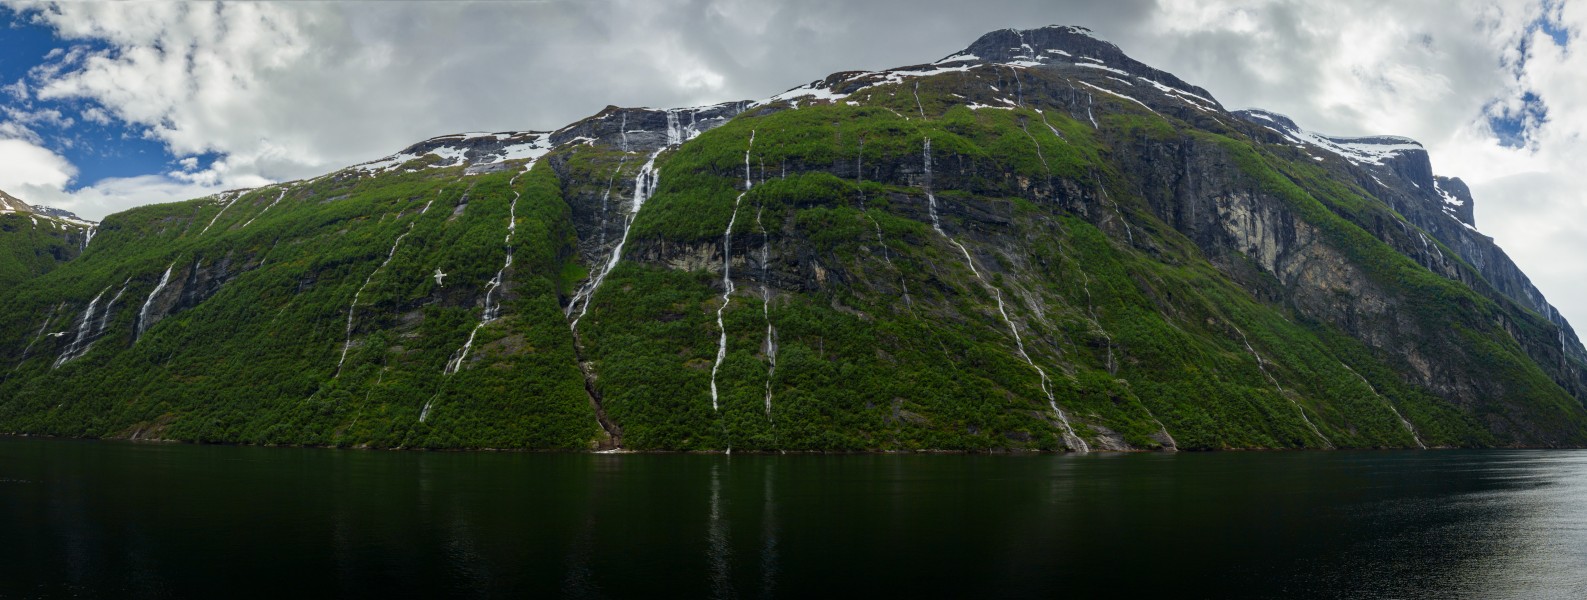 Meltwater running down the slopes of the Geirangerfjord